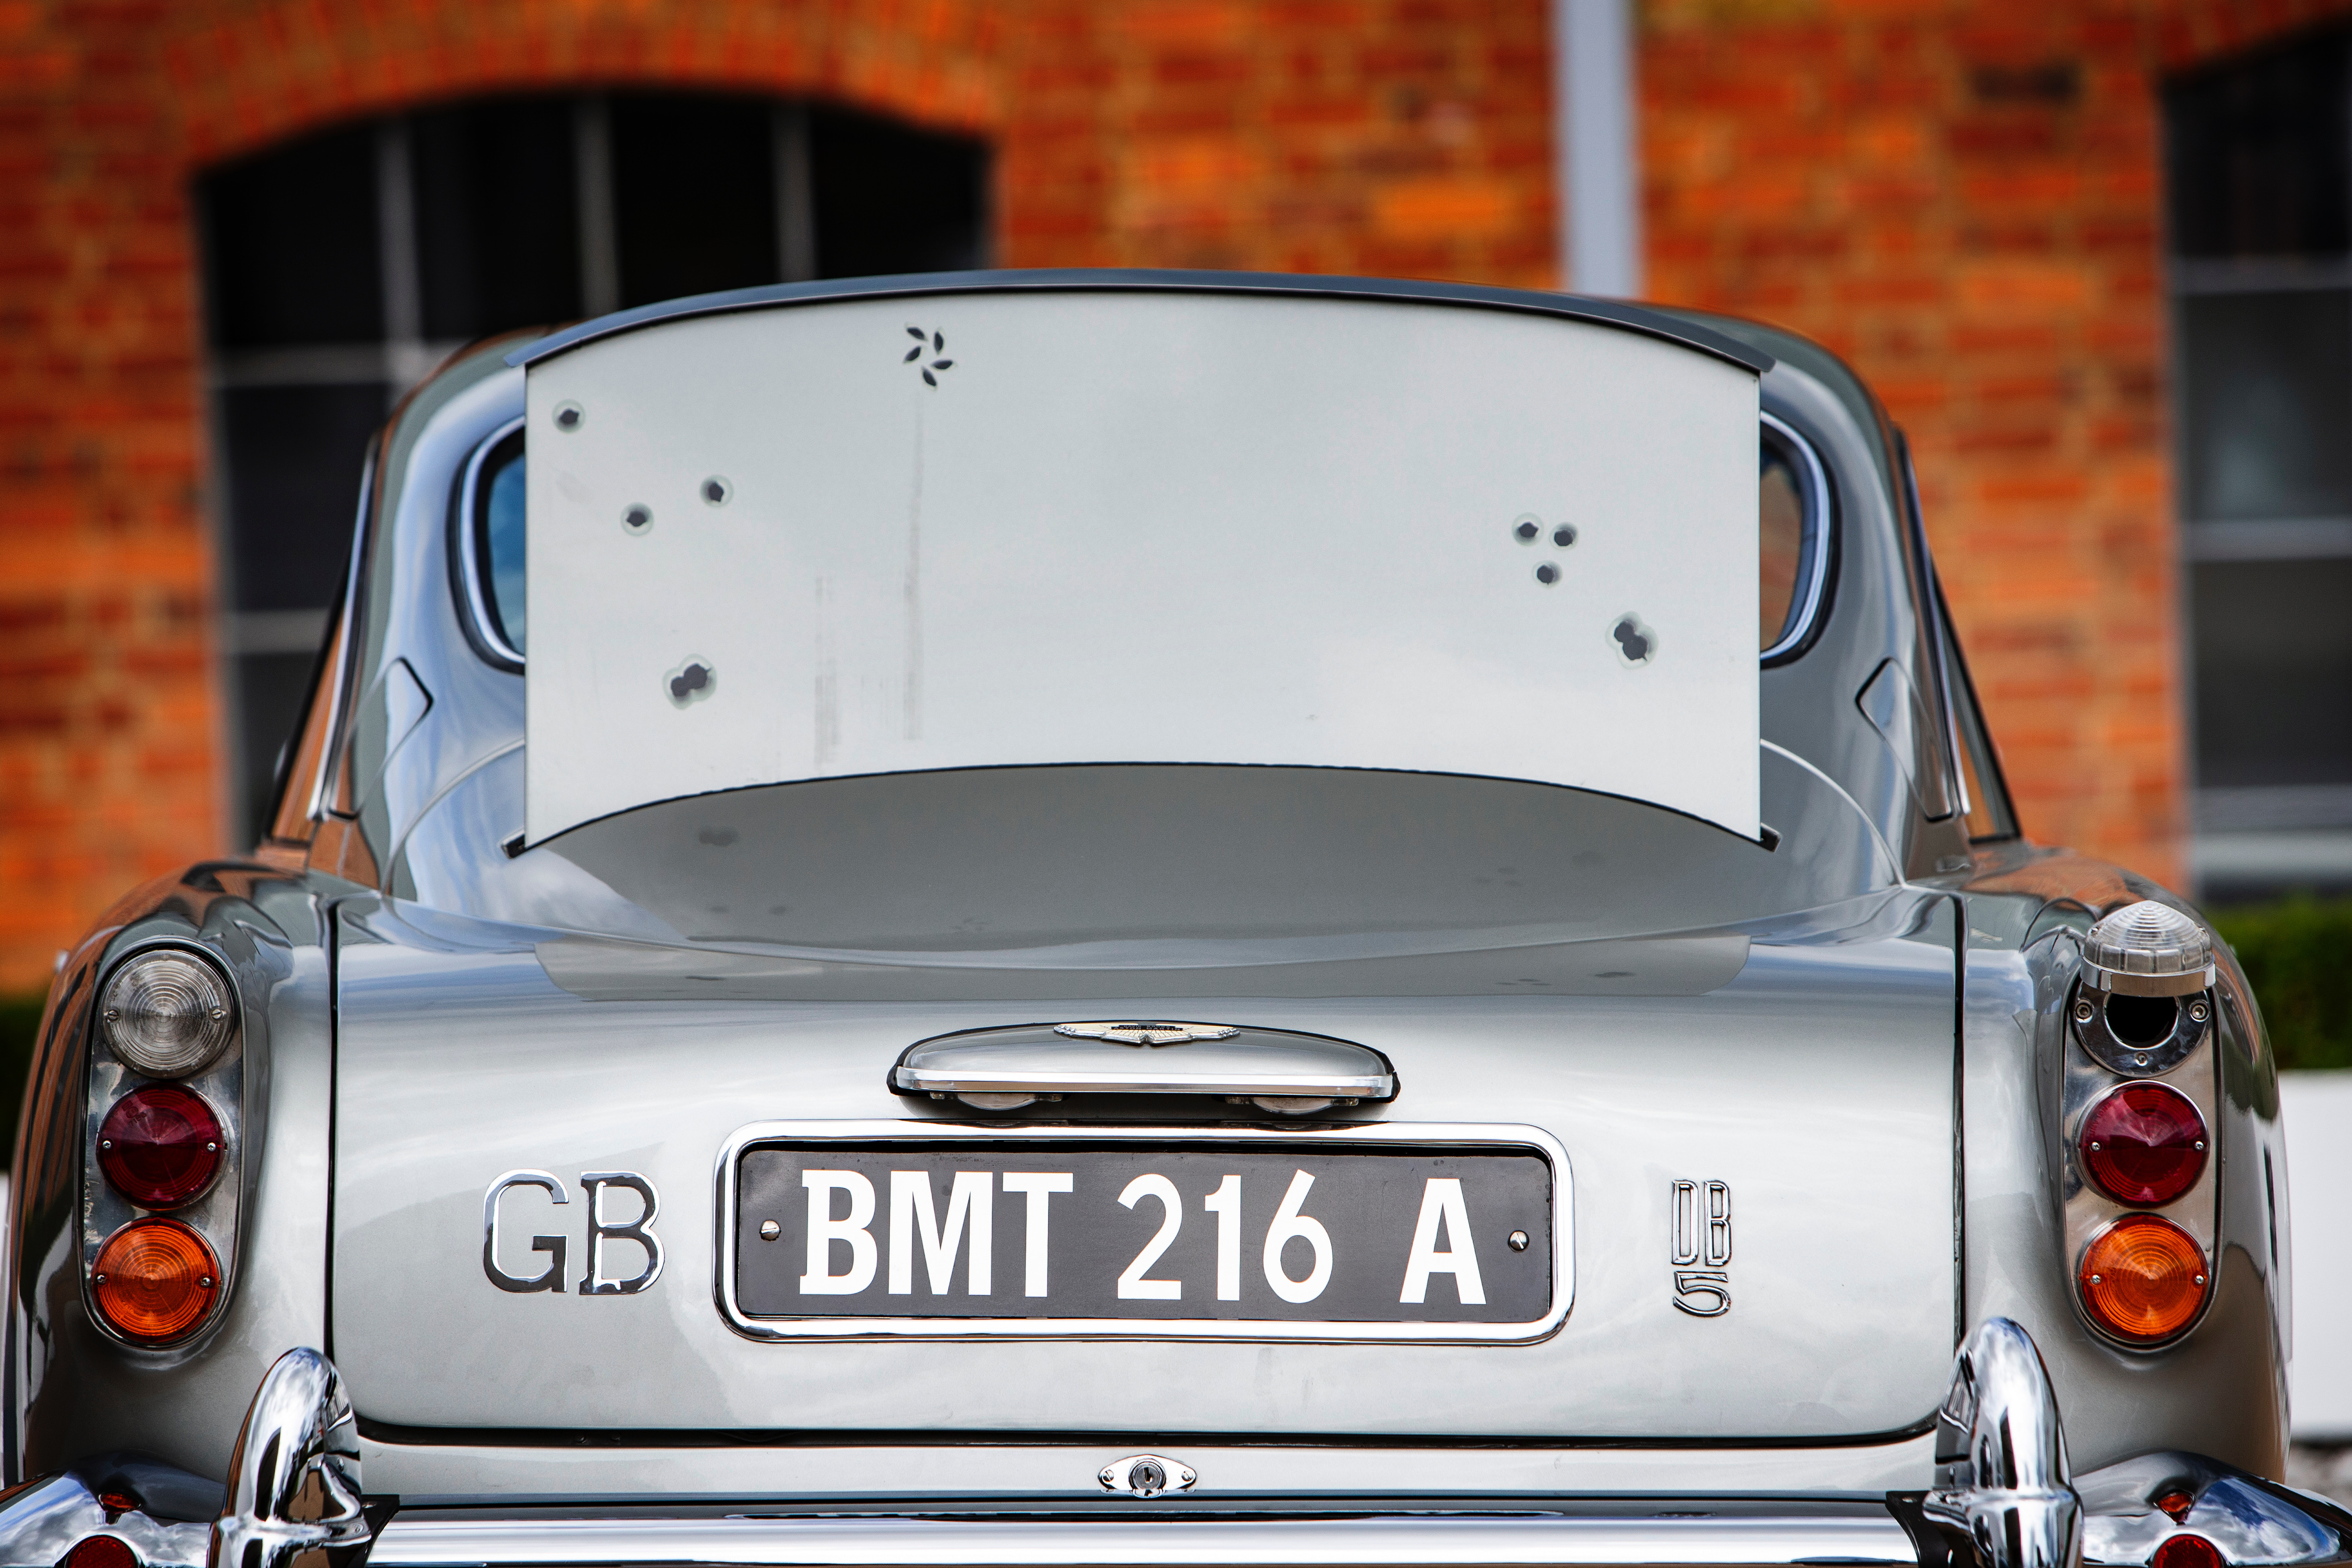 007 Aston Martin, 007 DB5 movie promo car heading to RM Sotheby’s Monterey auction, ClassicCars.com Journal